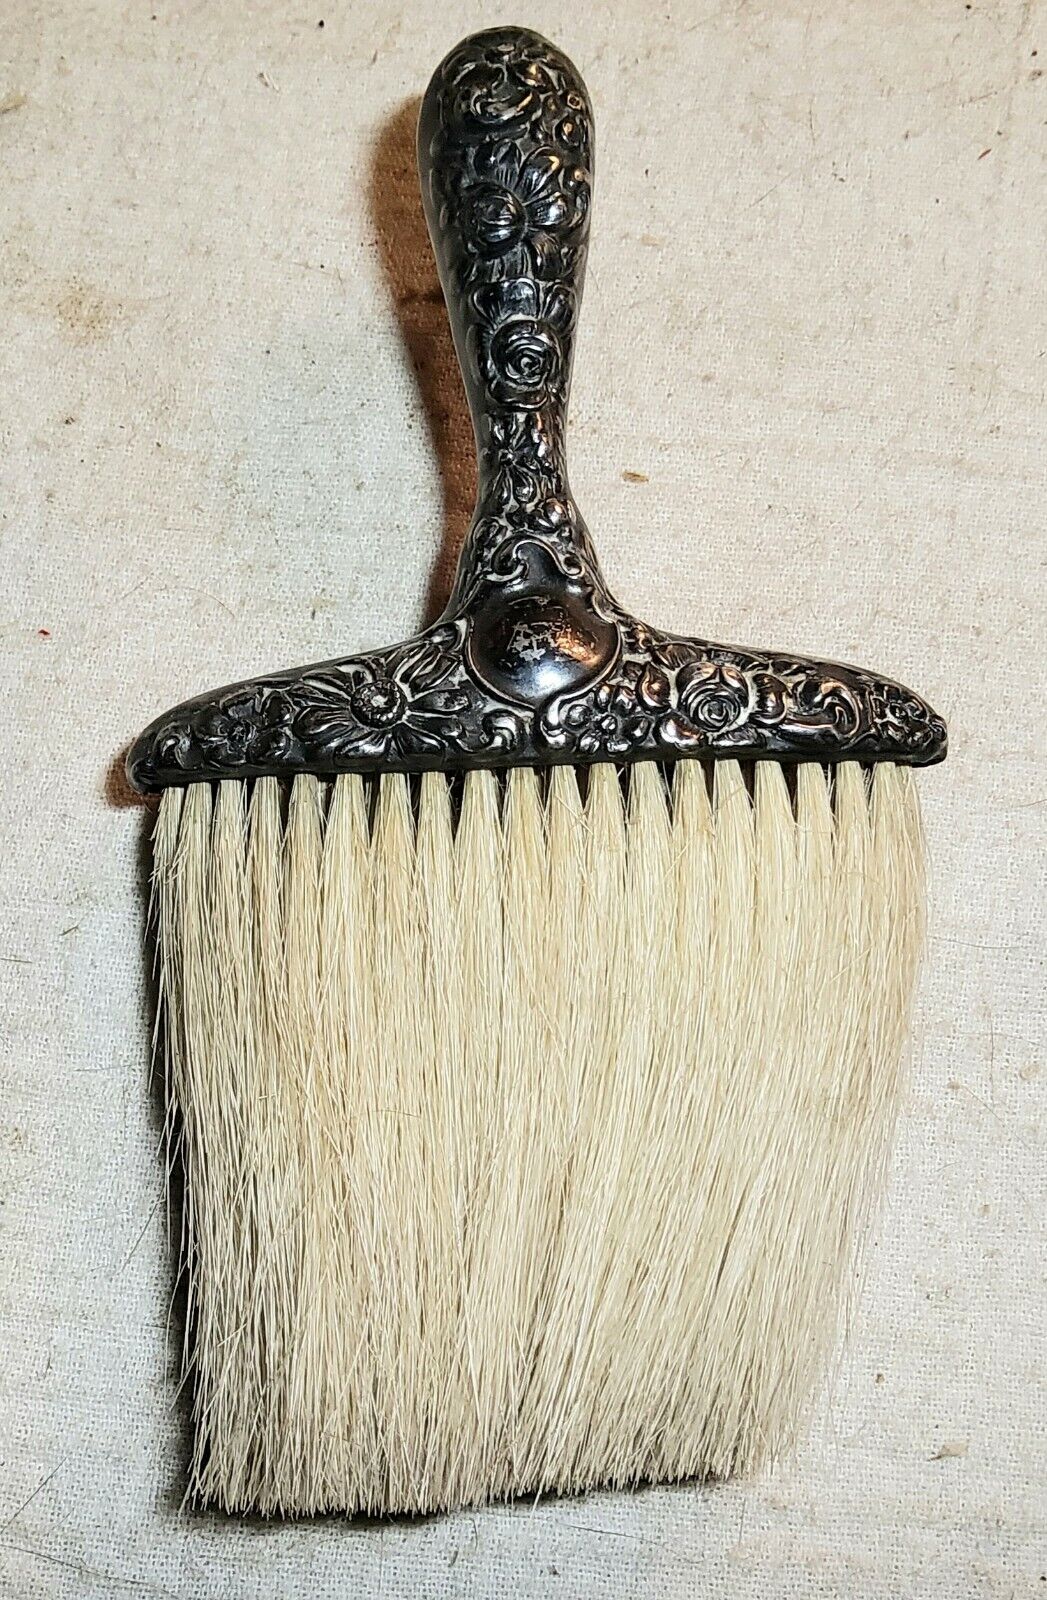 Antique Fancy Ornate Designed Sterling Silver Handled Small Clothes Or Hat Brush